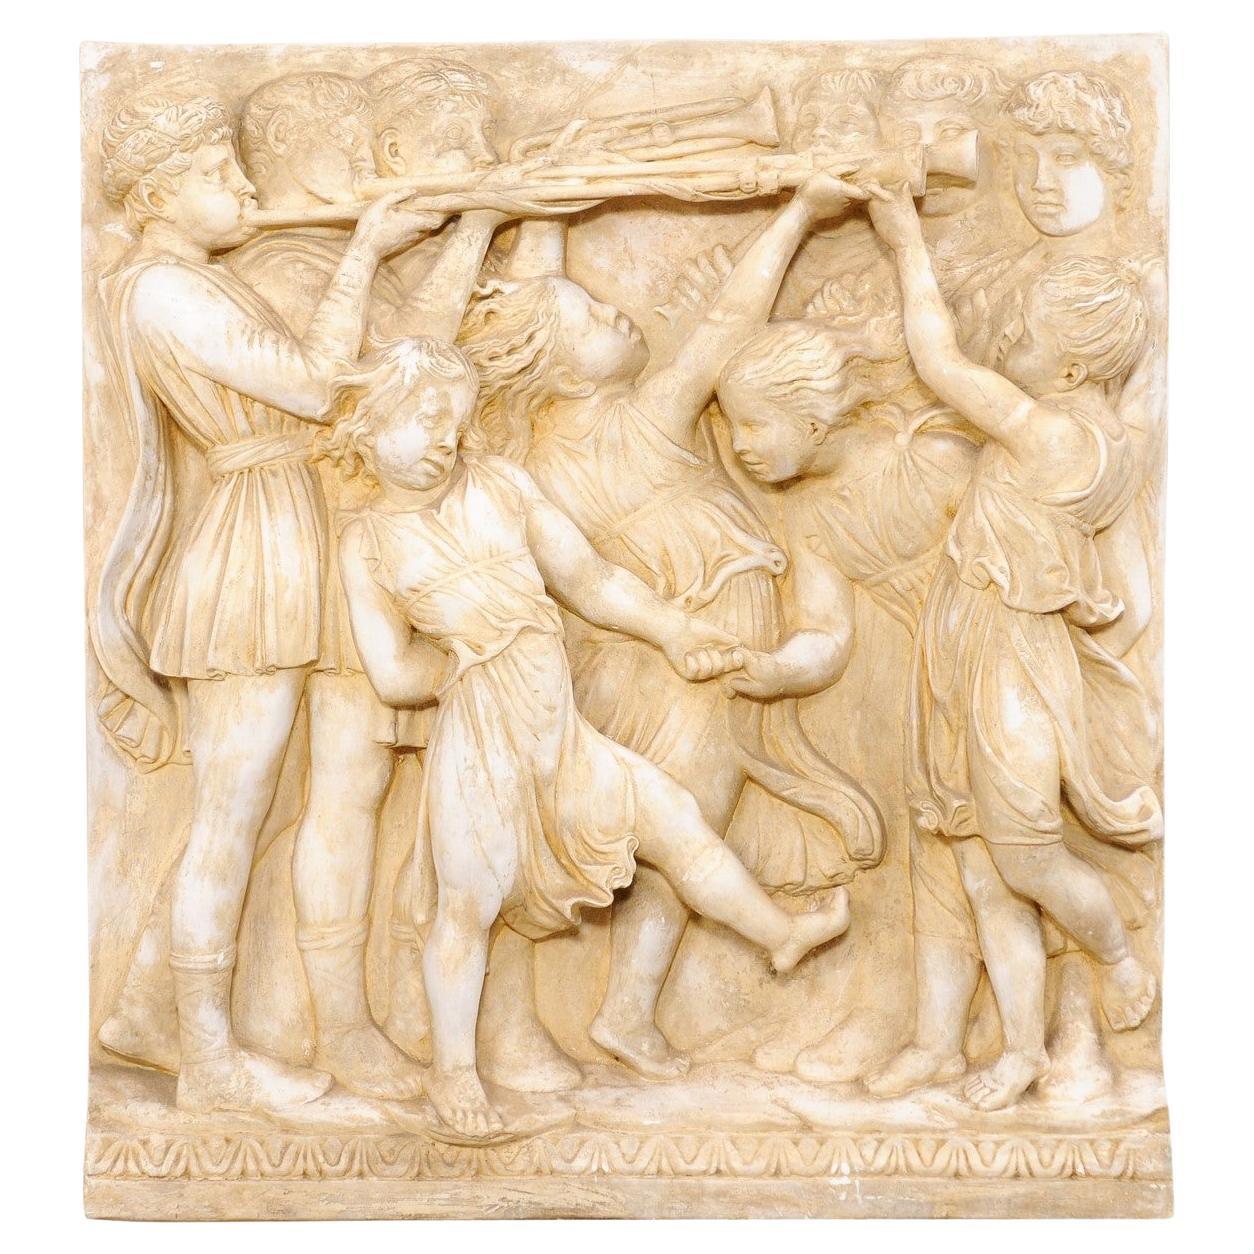 Italian Plaster Relief in Roman Figure Motif from the Mid-20th Century For Sale